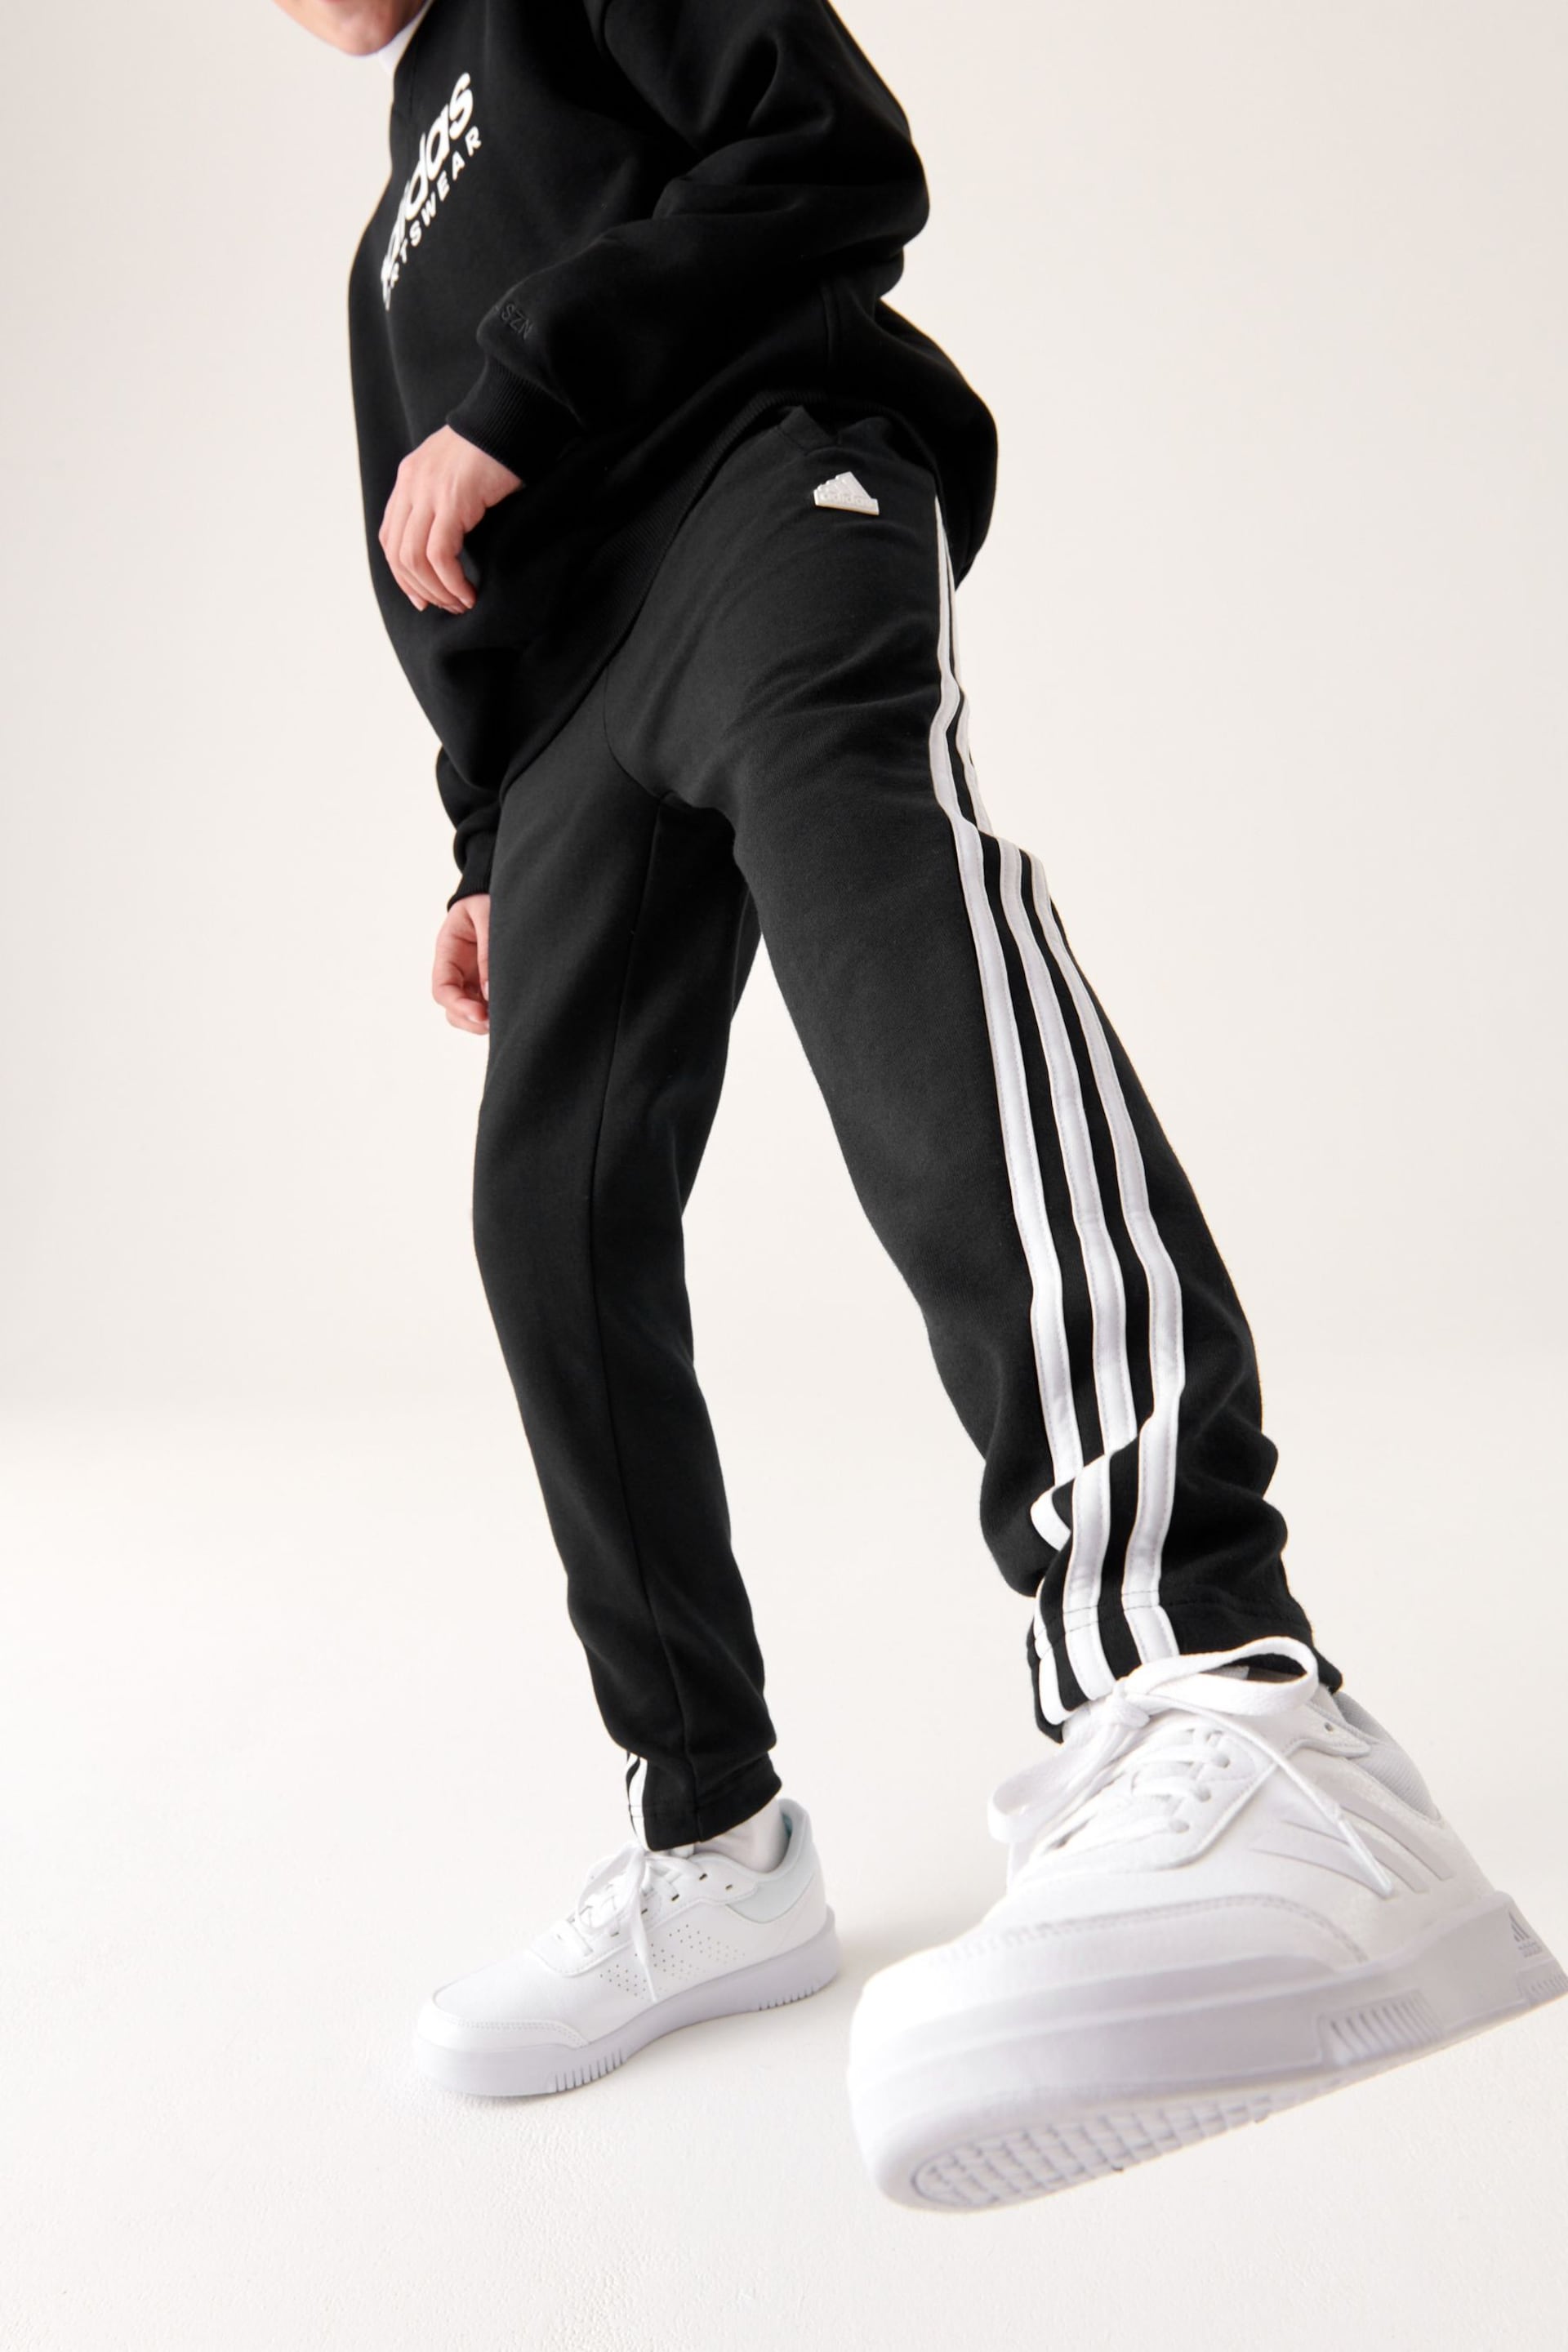 adidas Black Sportswear Future Icons 3-Stripes Ankle Length Joggers - Image 2 of 11